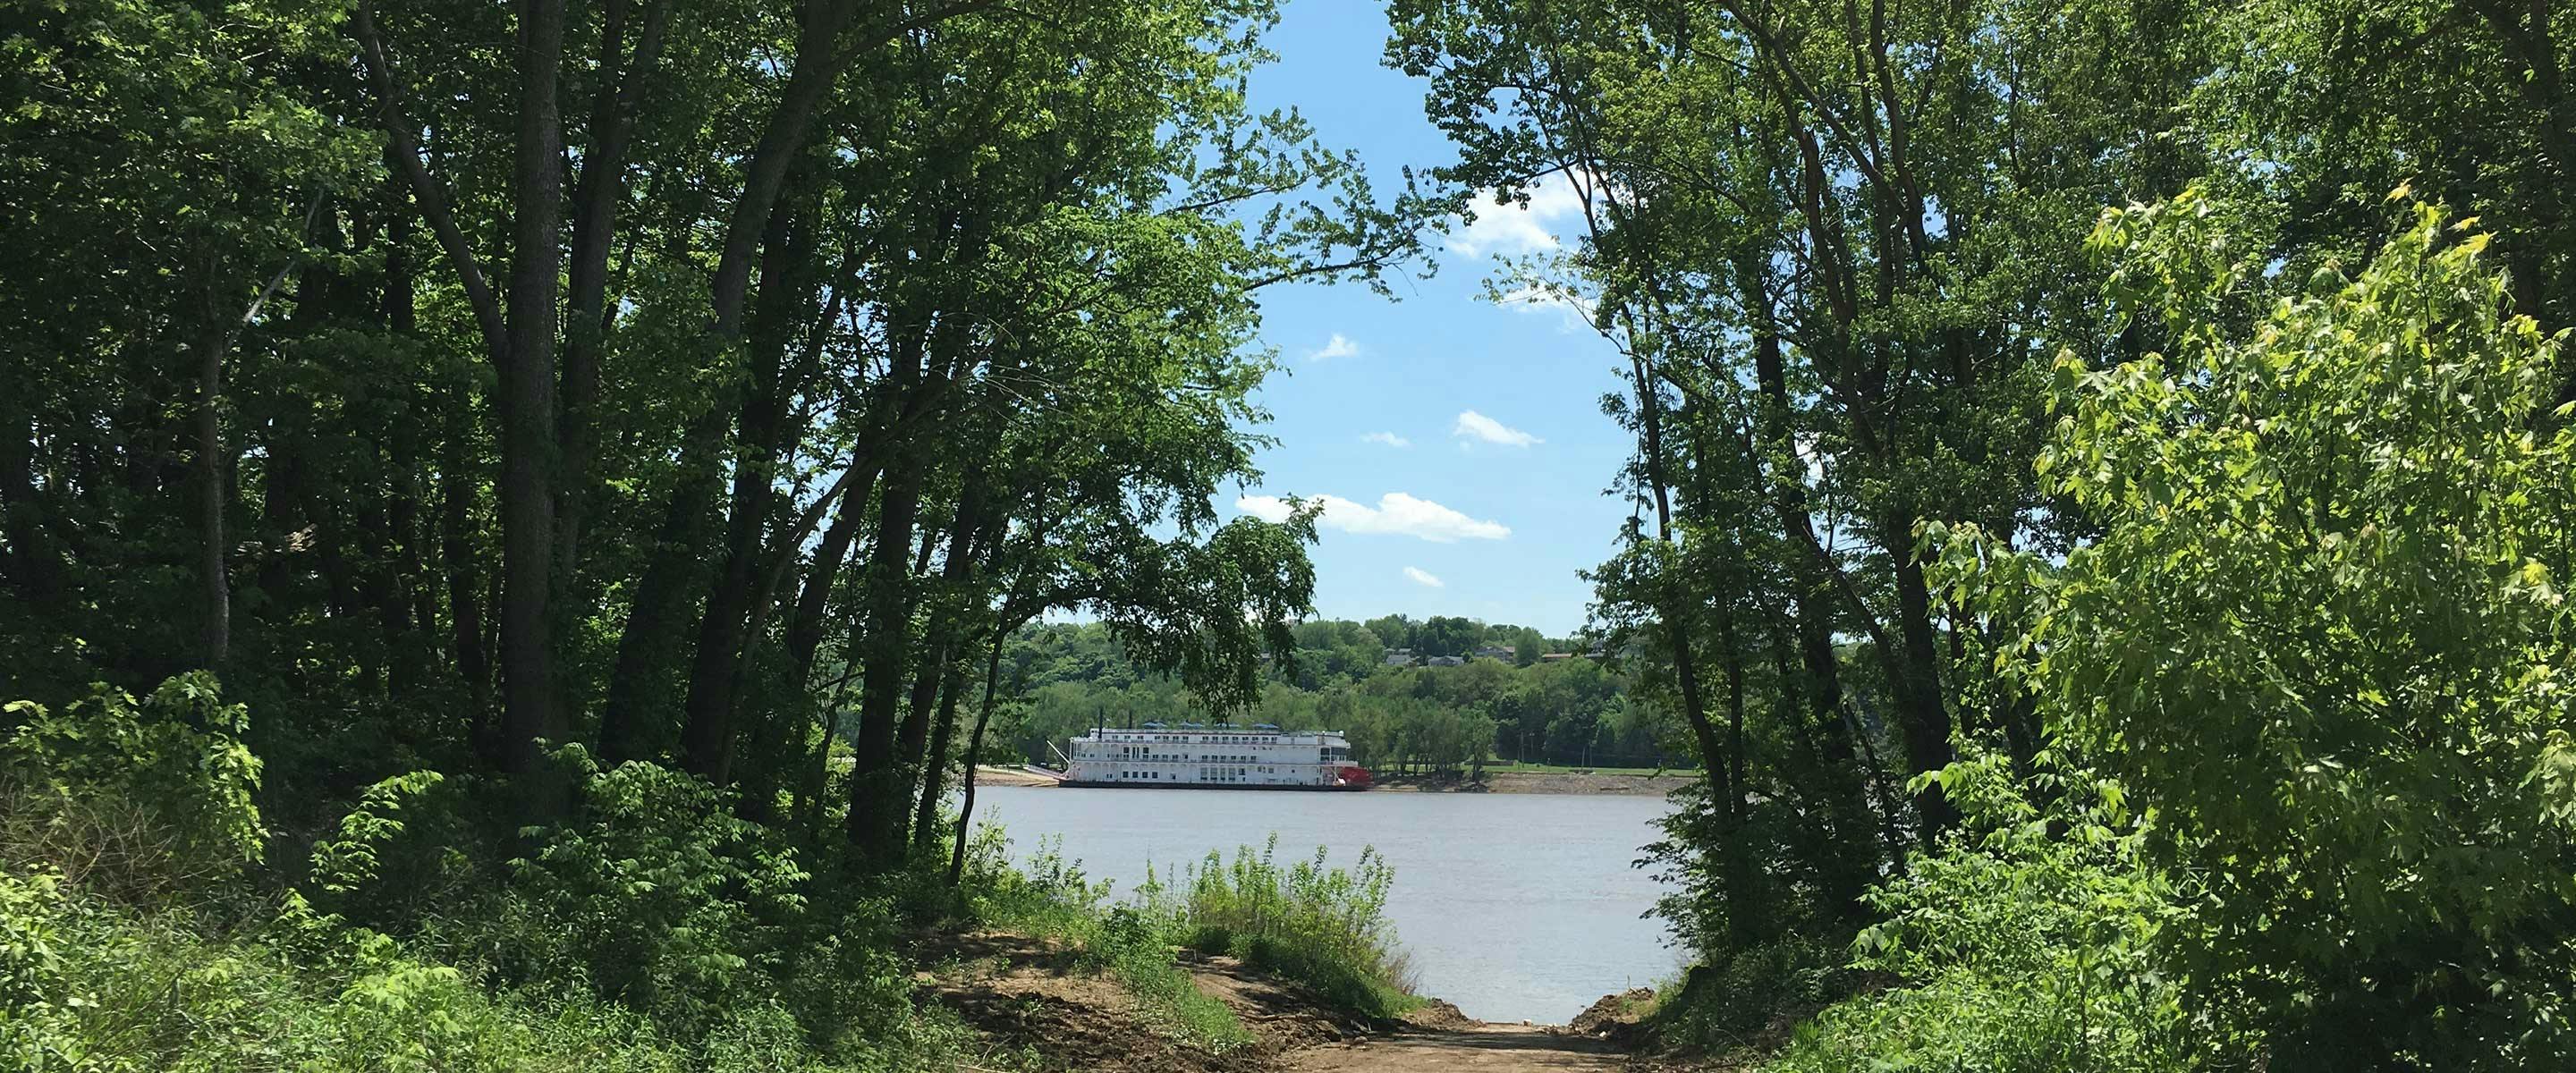 beautiful view of the rive3r between an opening in the trees at Morvin's Landing